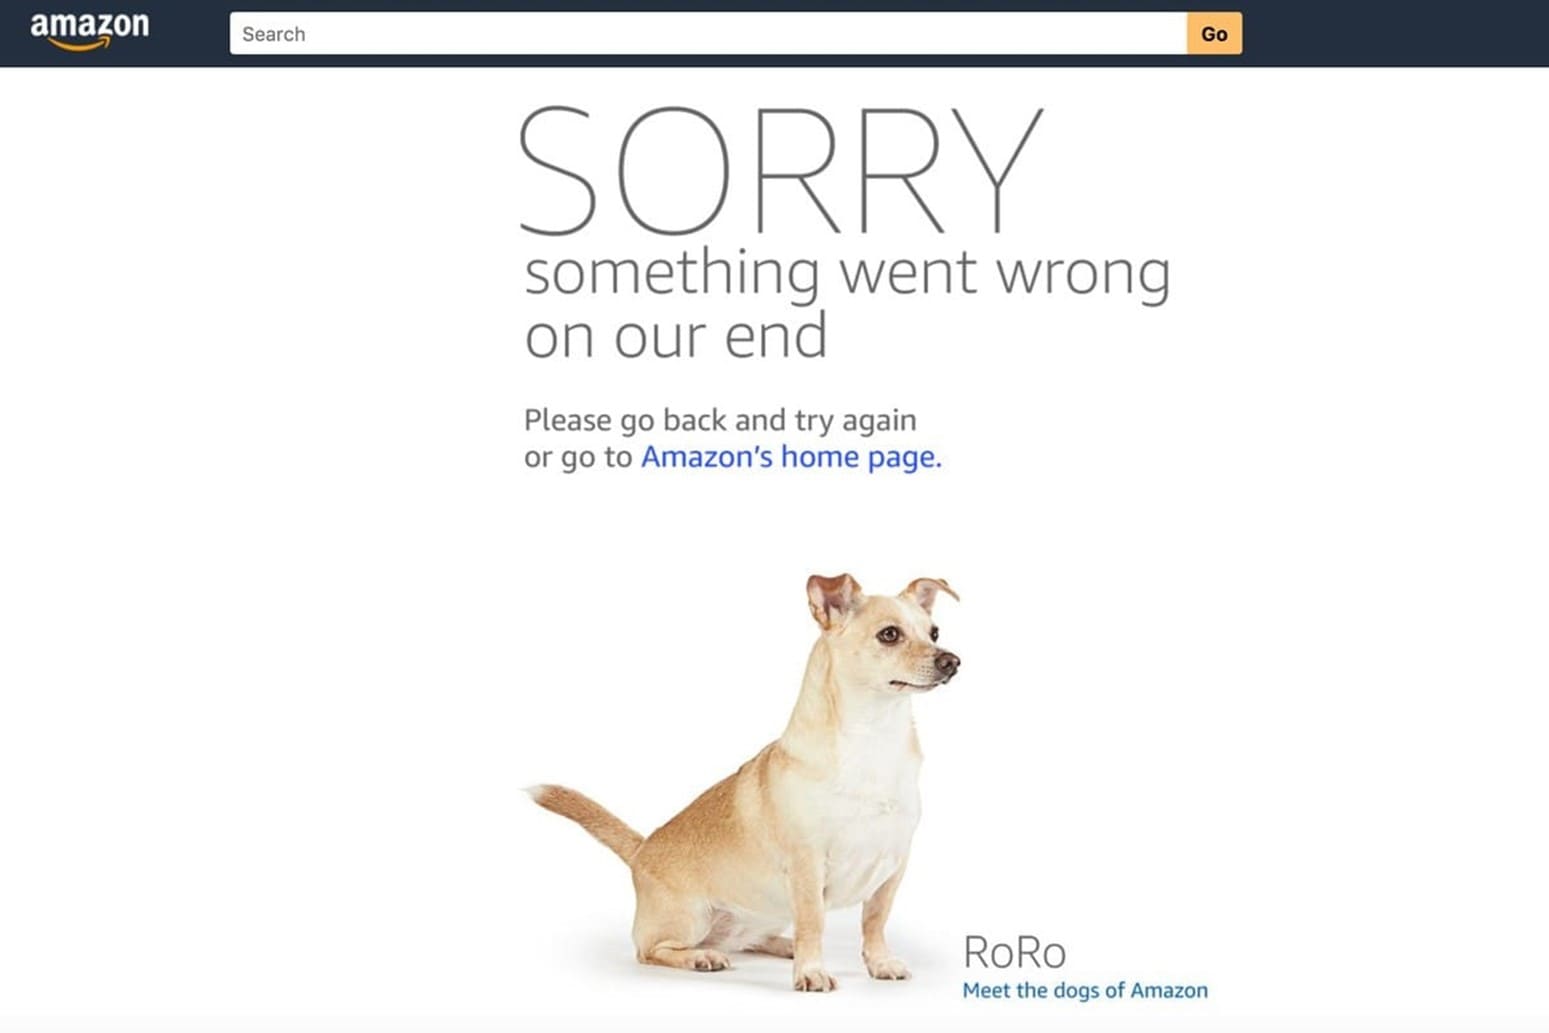 Amazon outage apology page